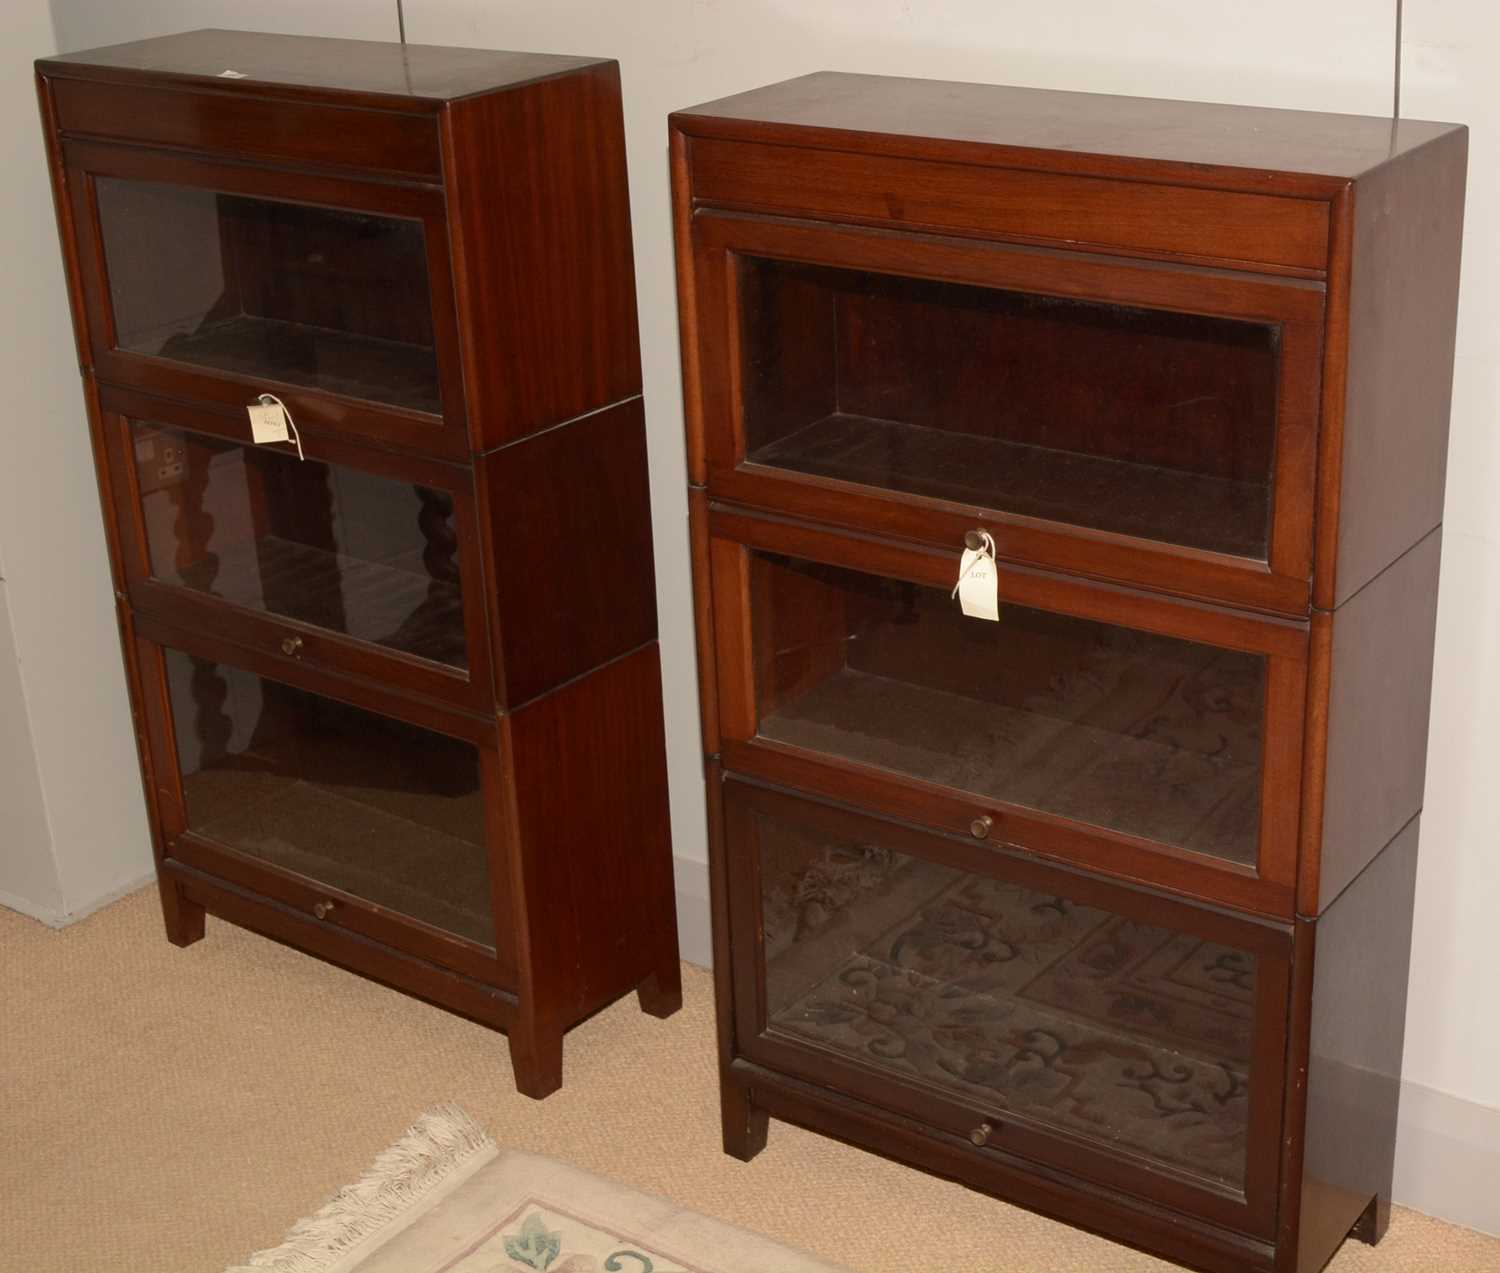 Lot 704 - Pair of Globe Wernicke style bookcases